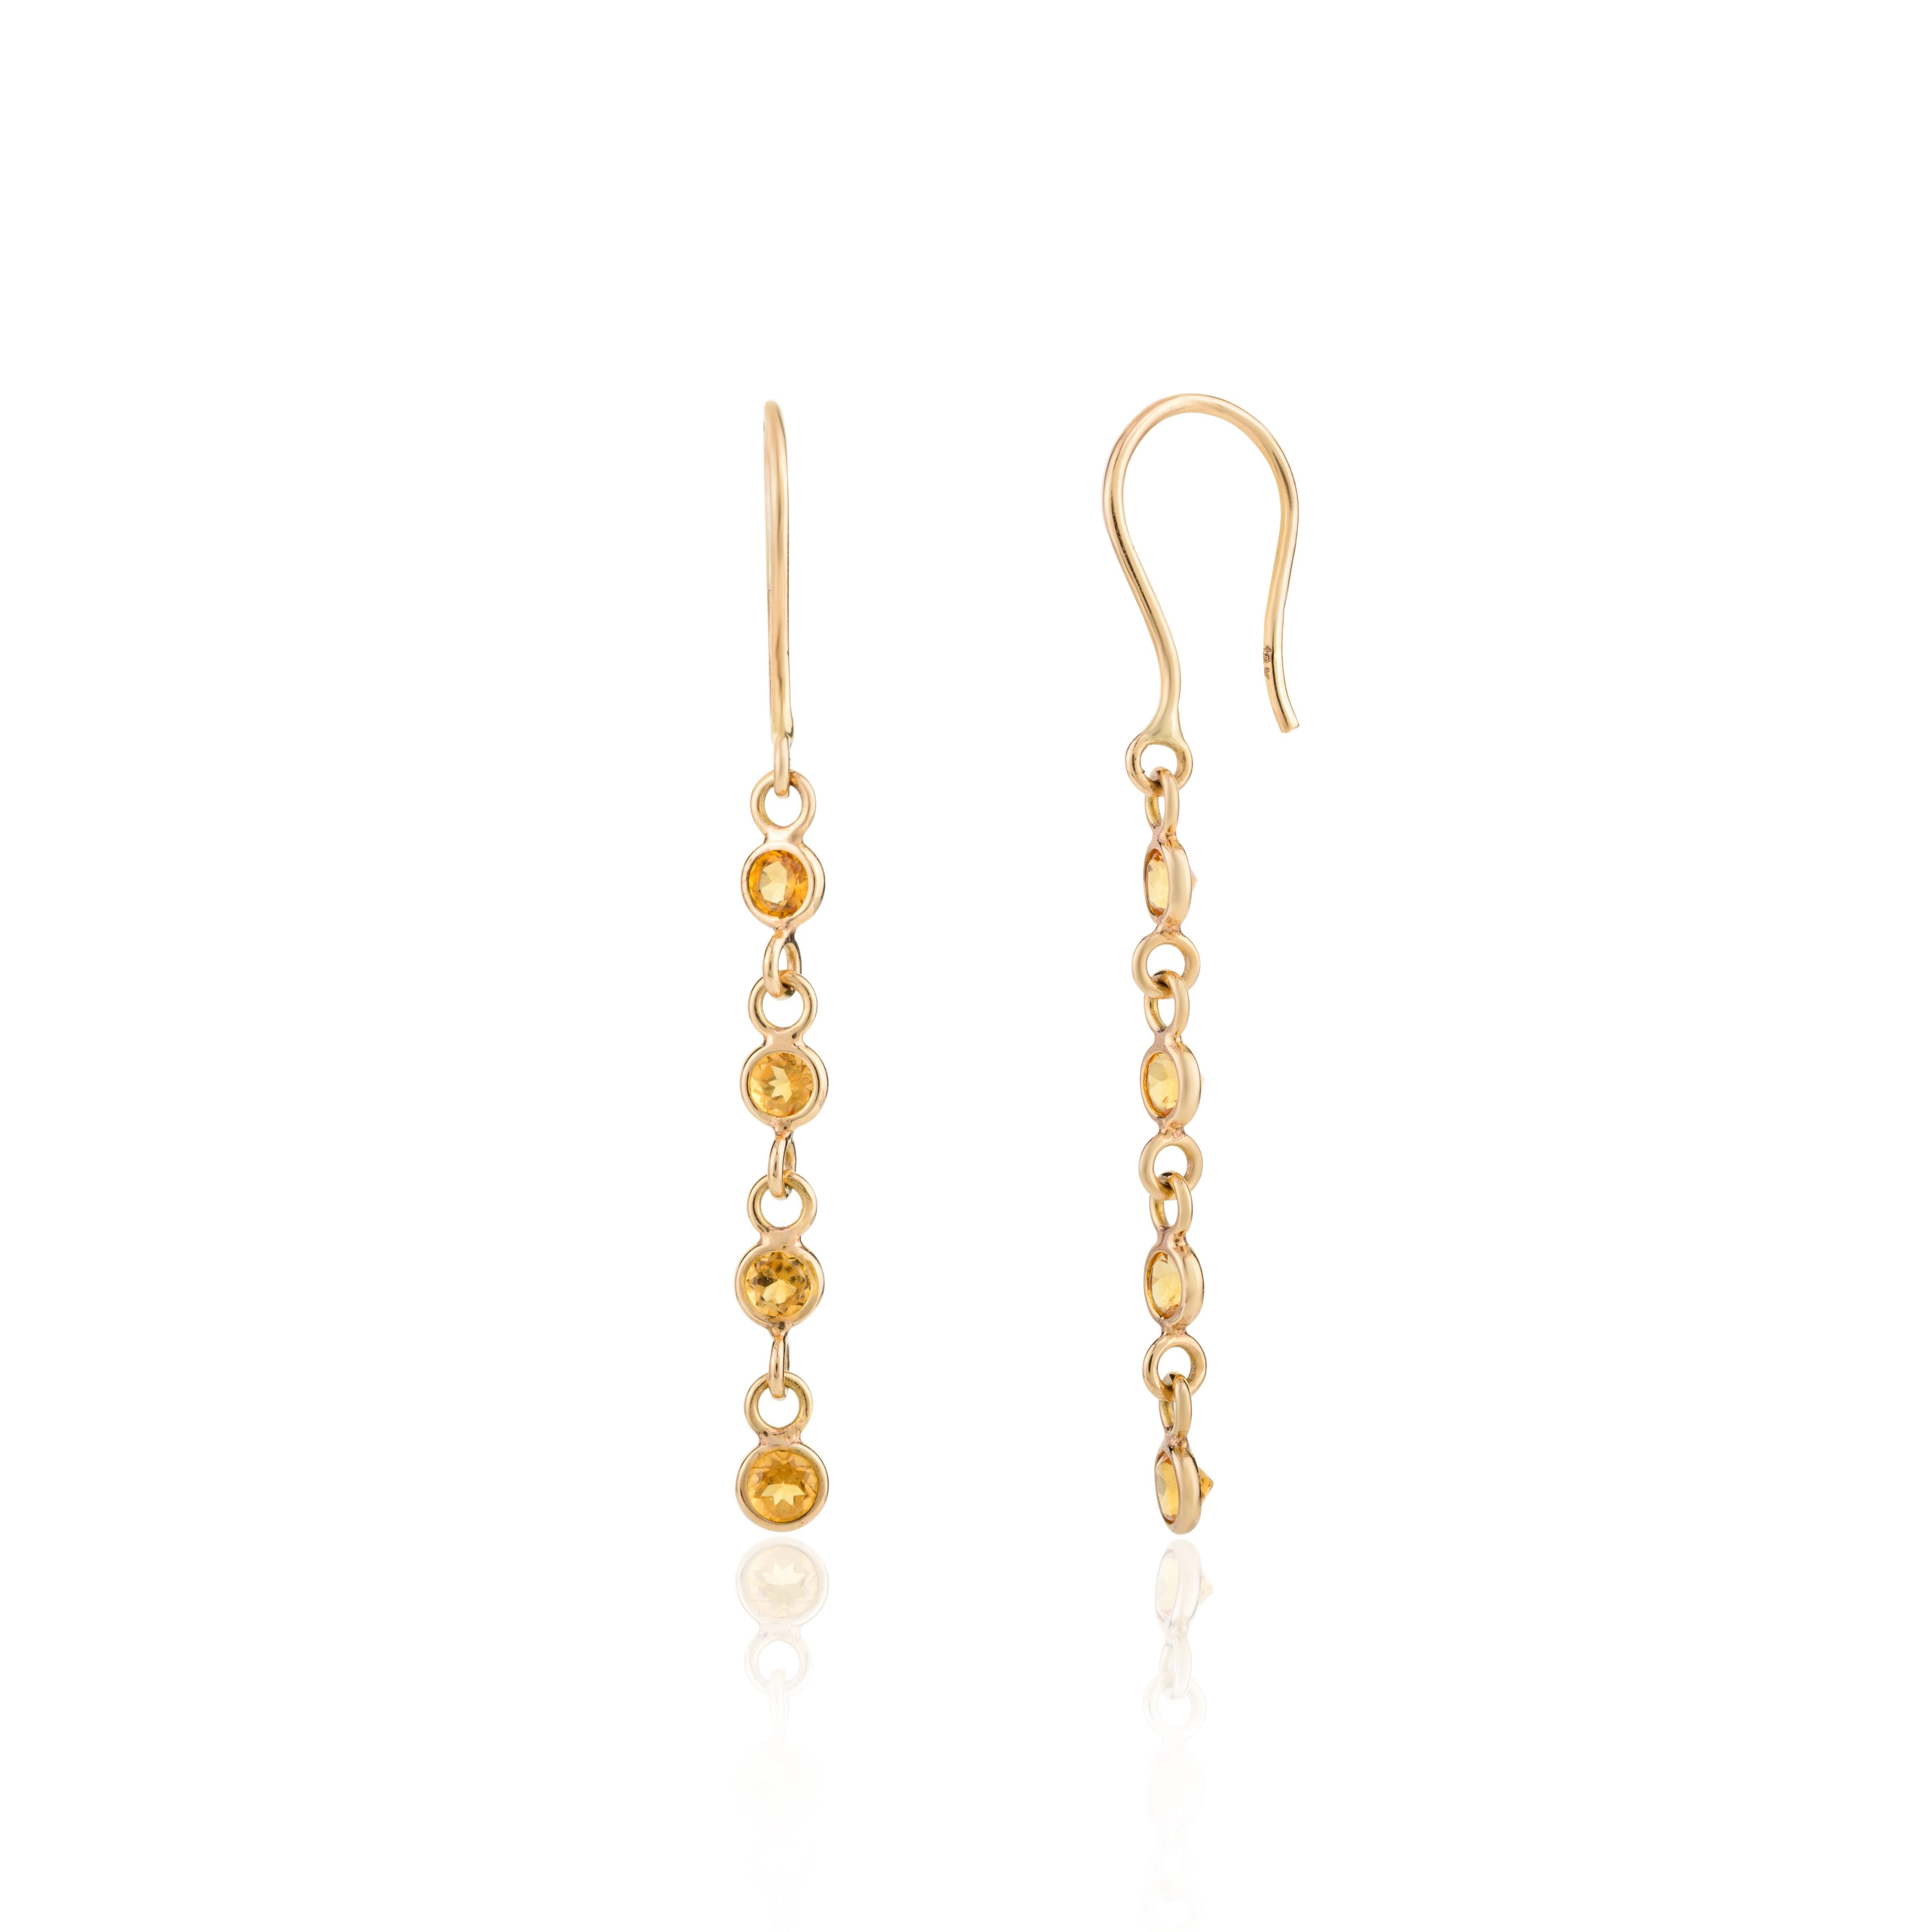 Modern Tiny Citrine Dangle Earrings Made in 18k Solid Yellow Gold Gift for Her For Sale